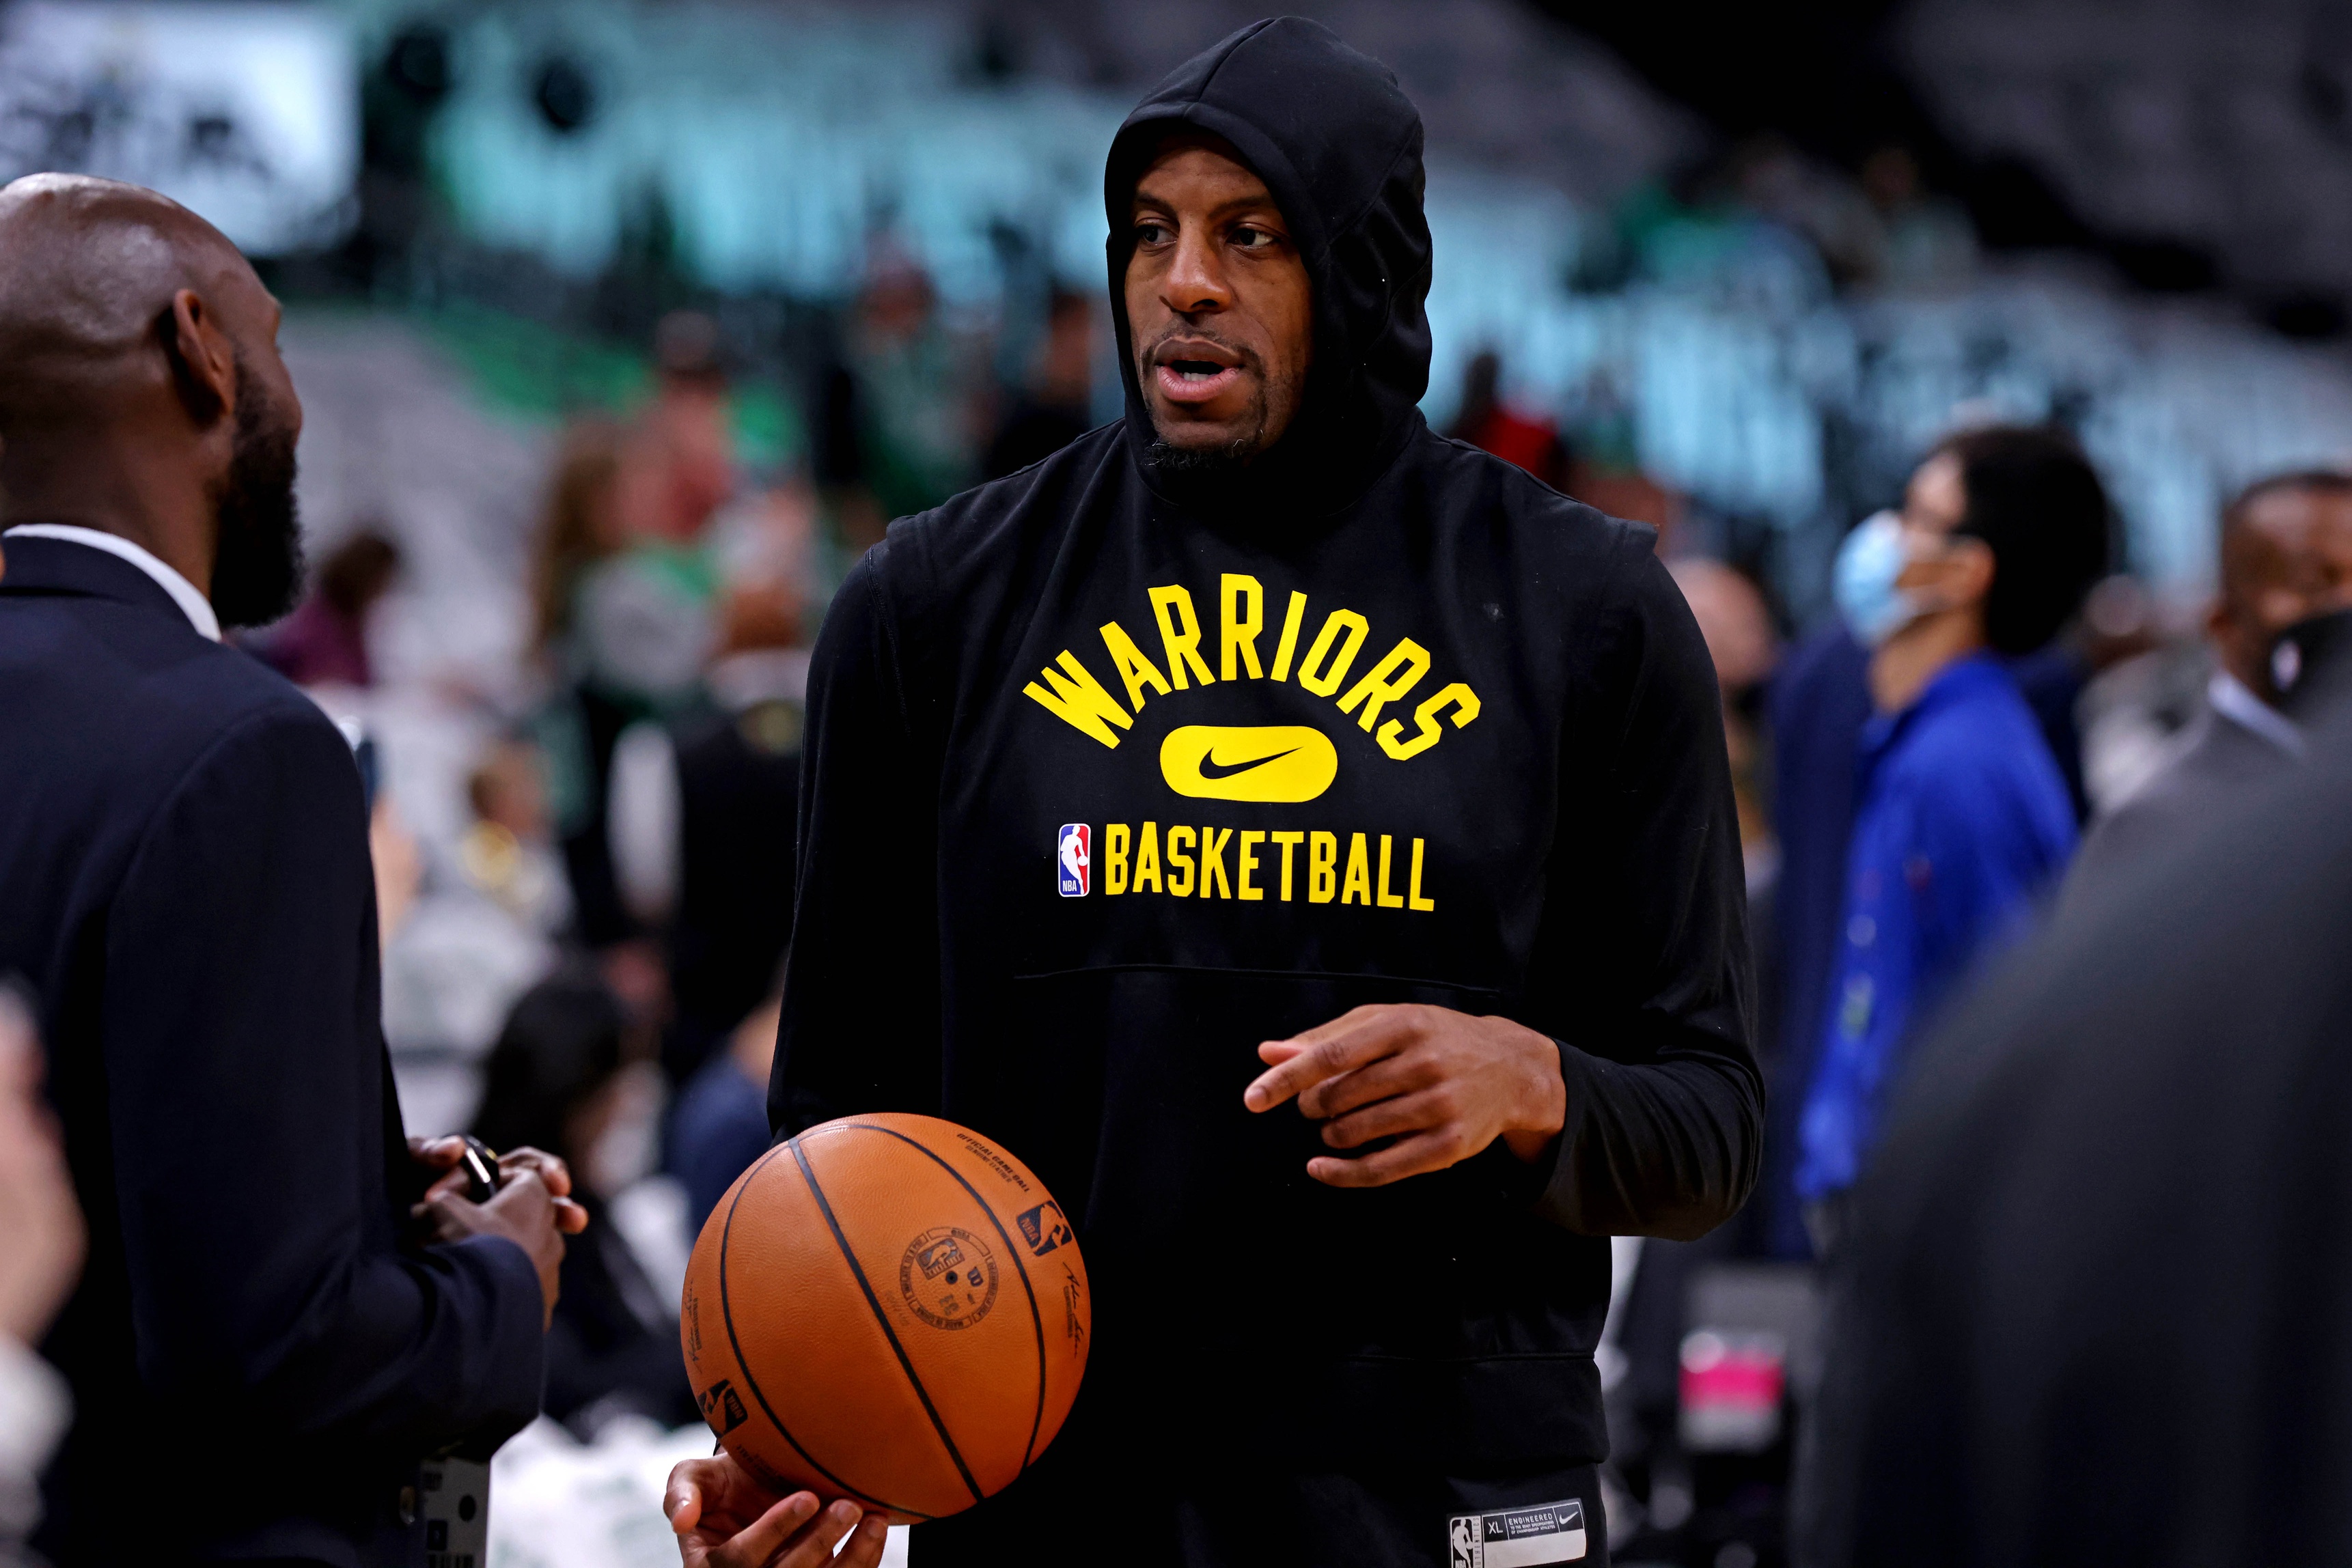 Andre Iguodala Sounds Off on Heat Culture After Winning NBA